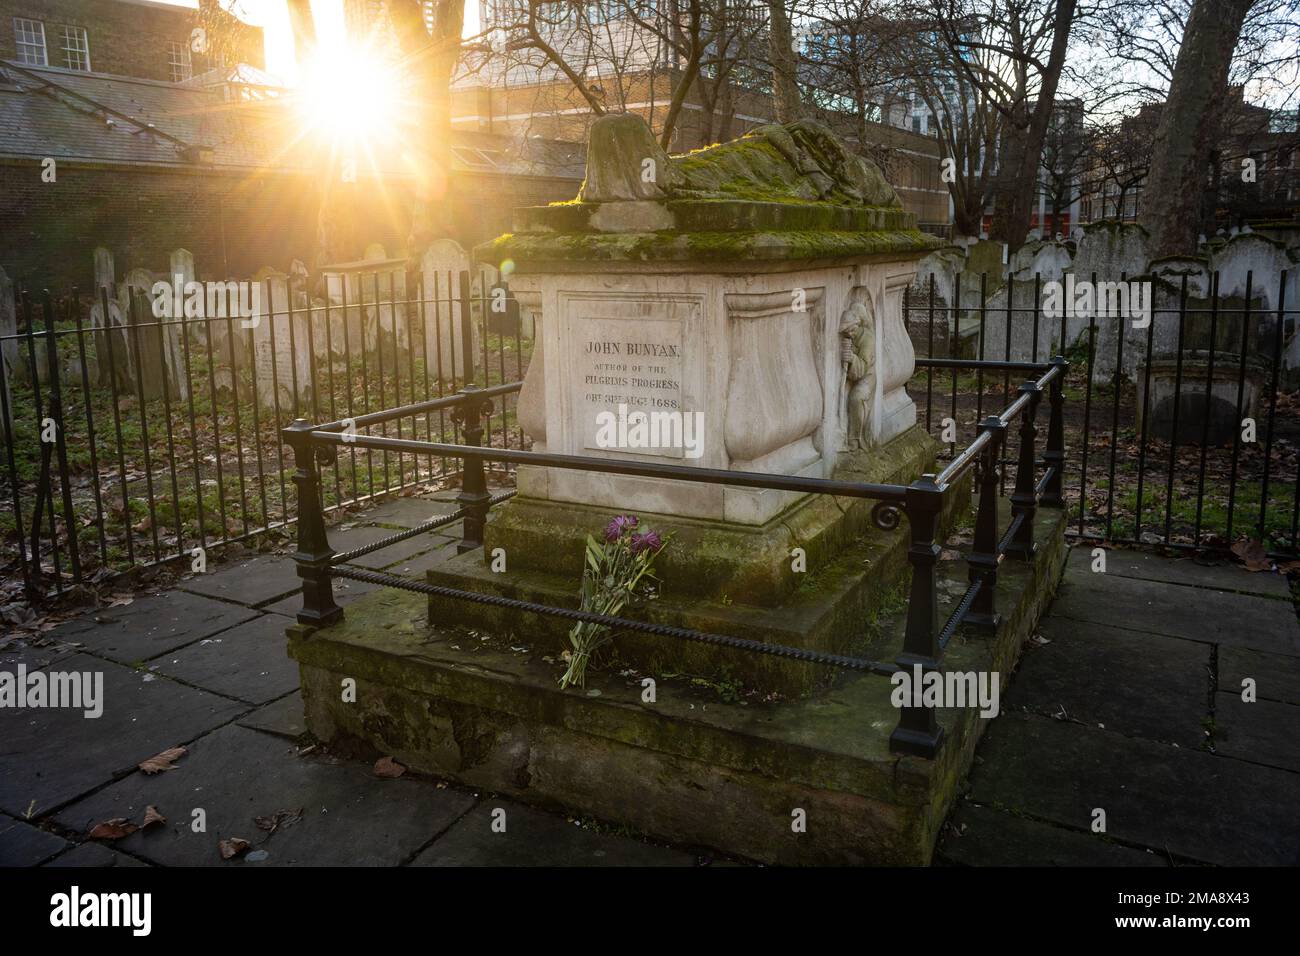 Memorial to John Bunyan, Pilgrim's Progress author, in Bunhill Fields, a former burial ground for nonconformists in Islington, London Stock Photo